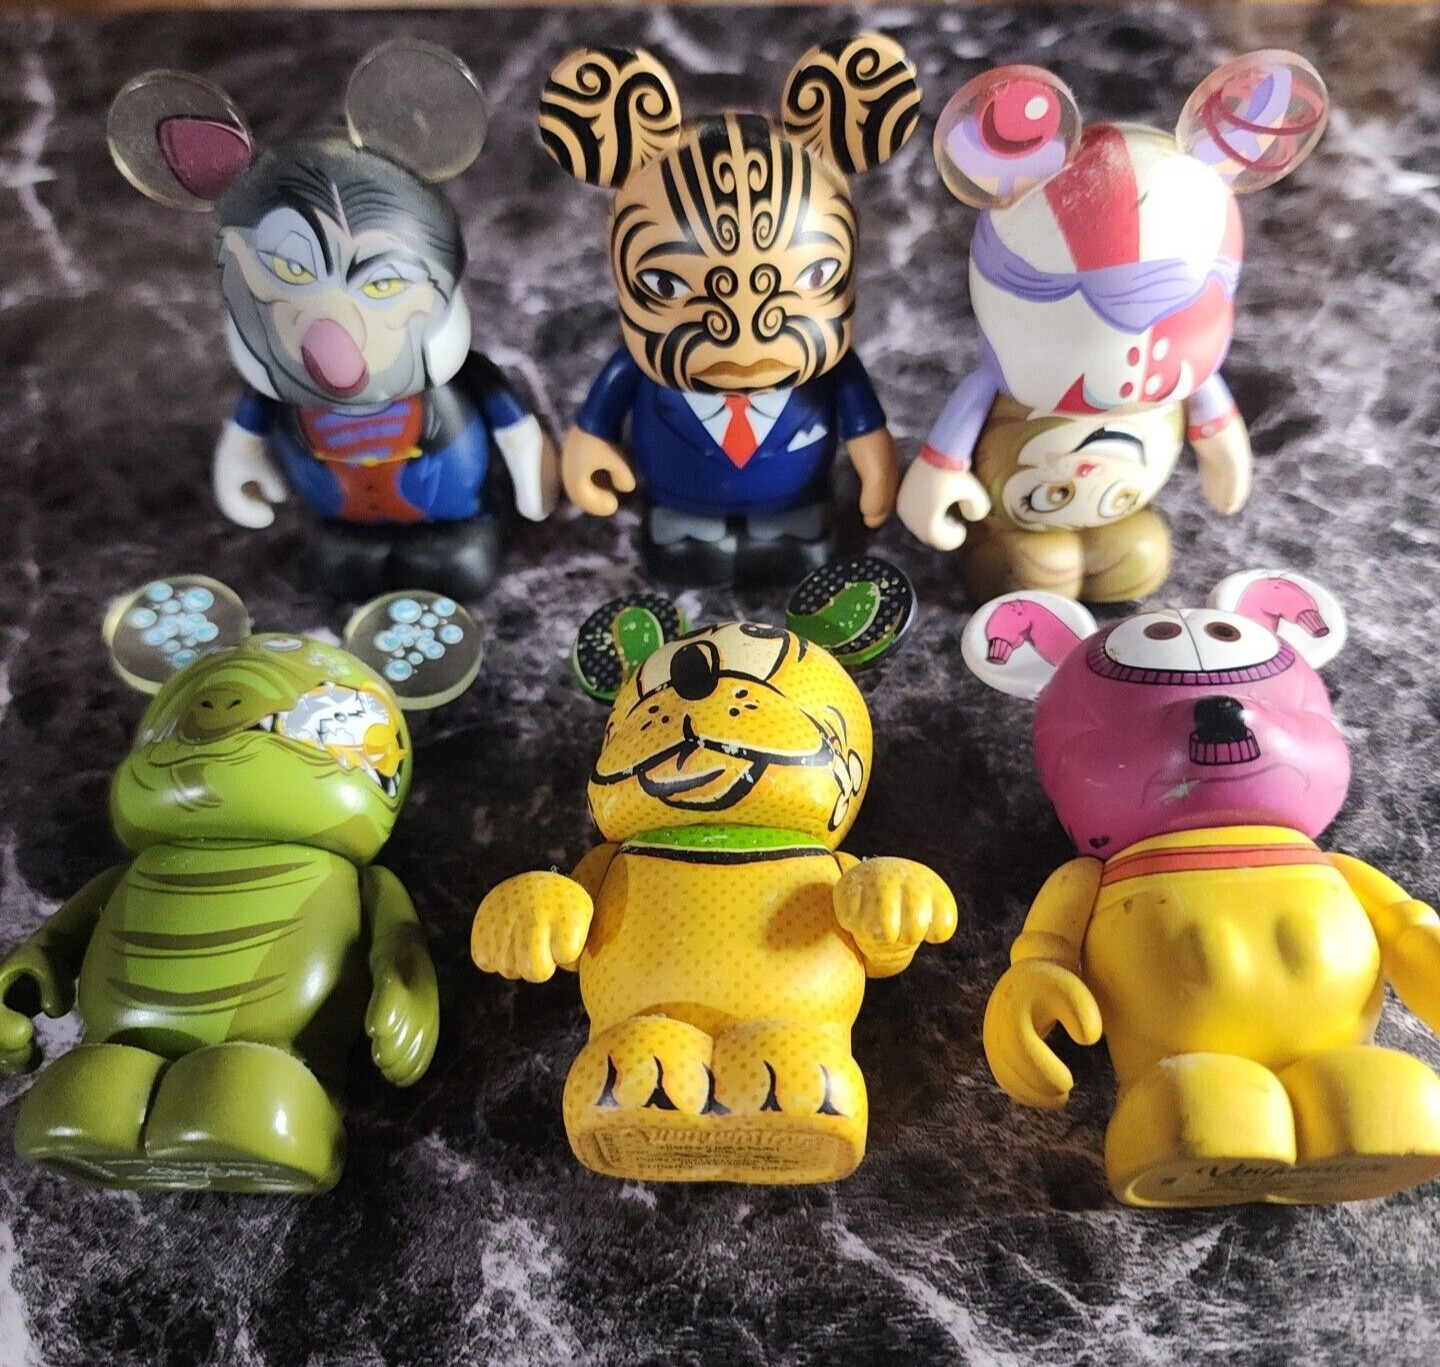 Disney Vinylmation Lot of 6 Figures from Various Series Disney Parks 3 inches